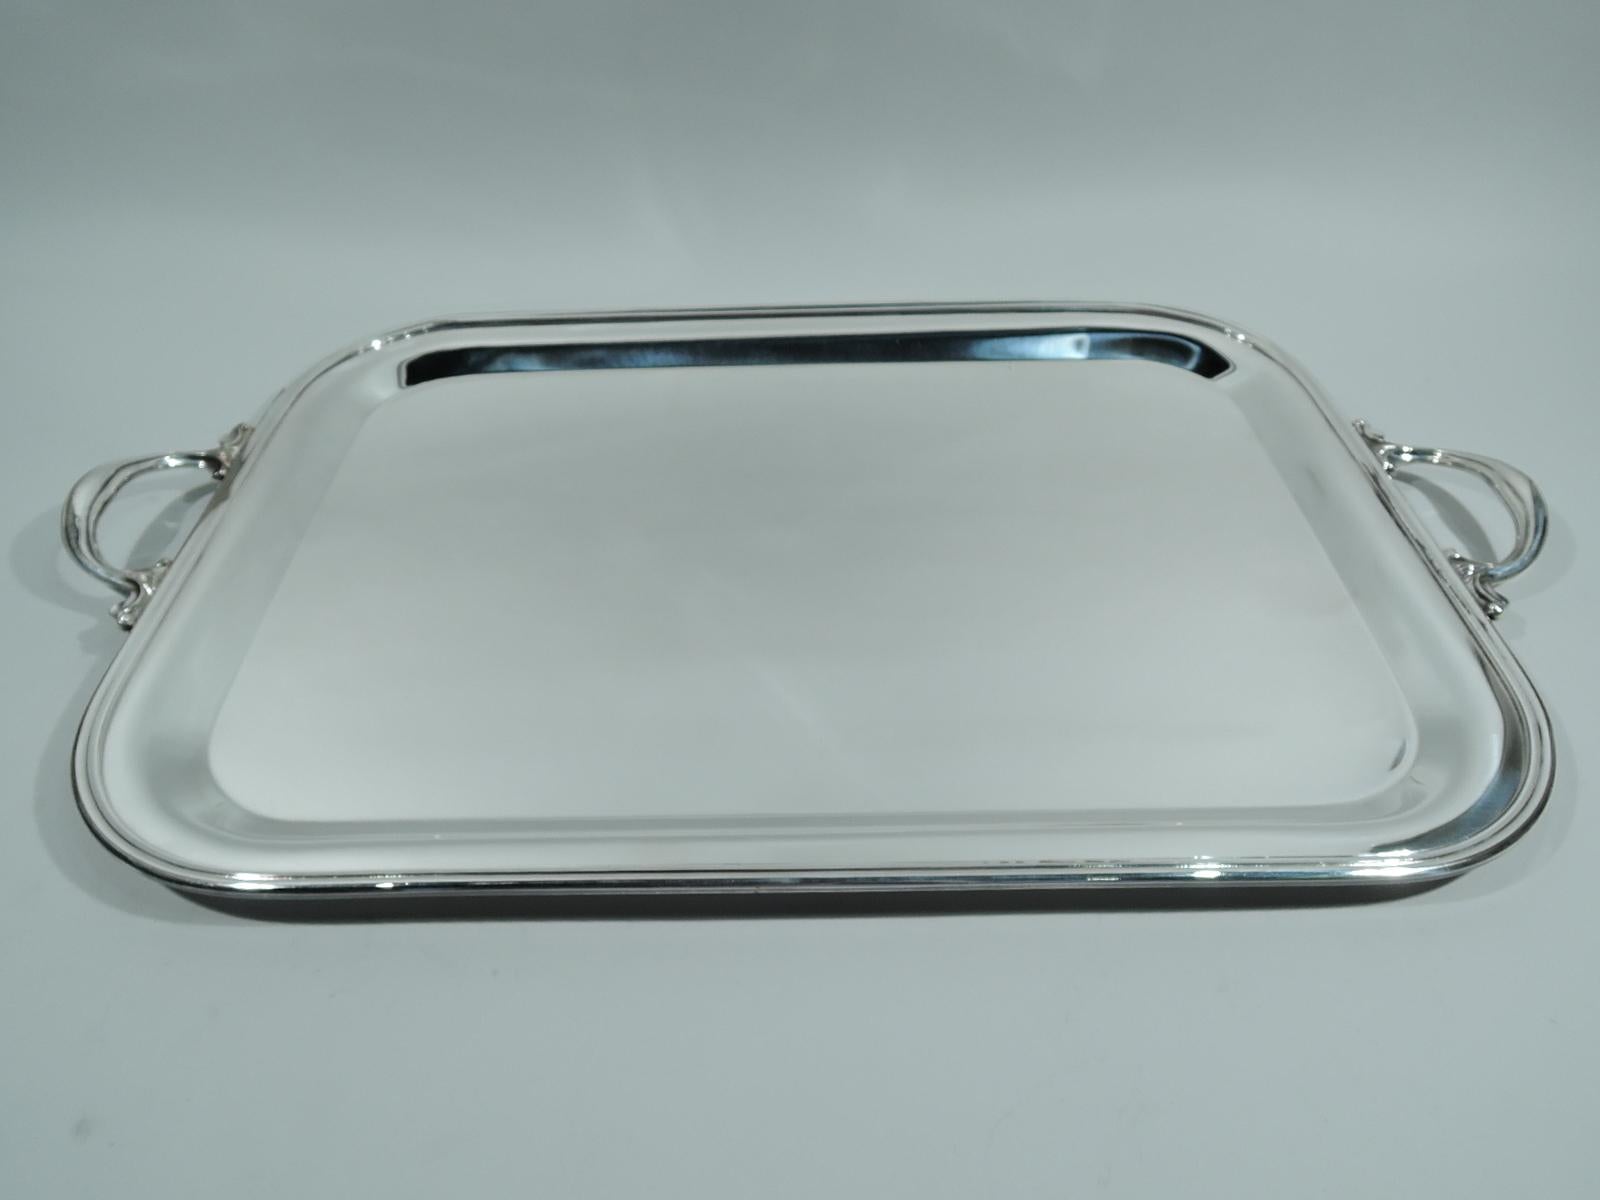 Modern sterling silver serving tray. Rectangular with curved corners and molded rim. Leafy-scroll mounted c-scroll end handles. Post-1967 Italian marks including Pampaloni maker’s stamp. Weight: 111 troy ounces.